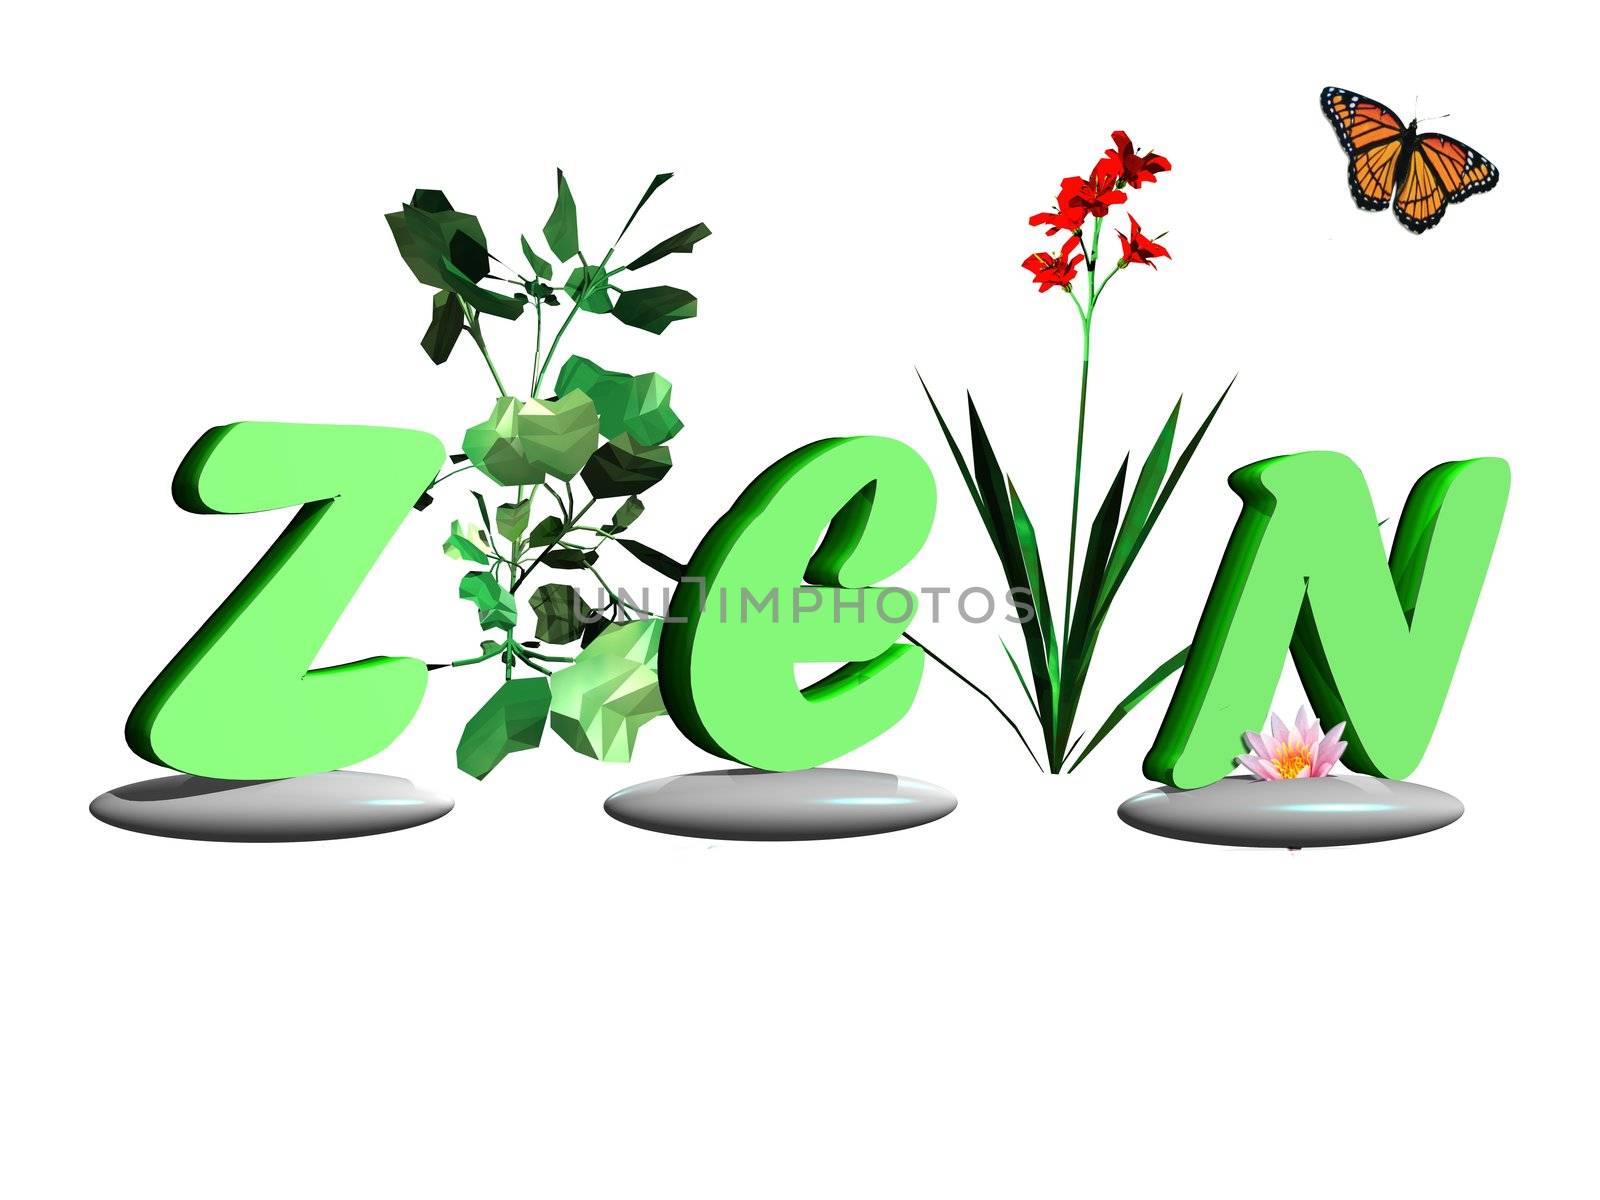 Zen green letters upon grey stones and surrounded with plants, flowers and butterfly in a white background